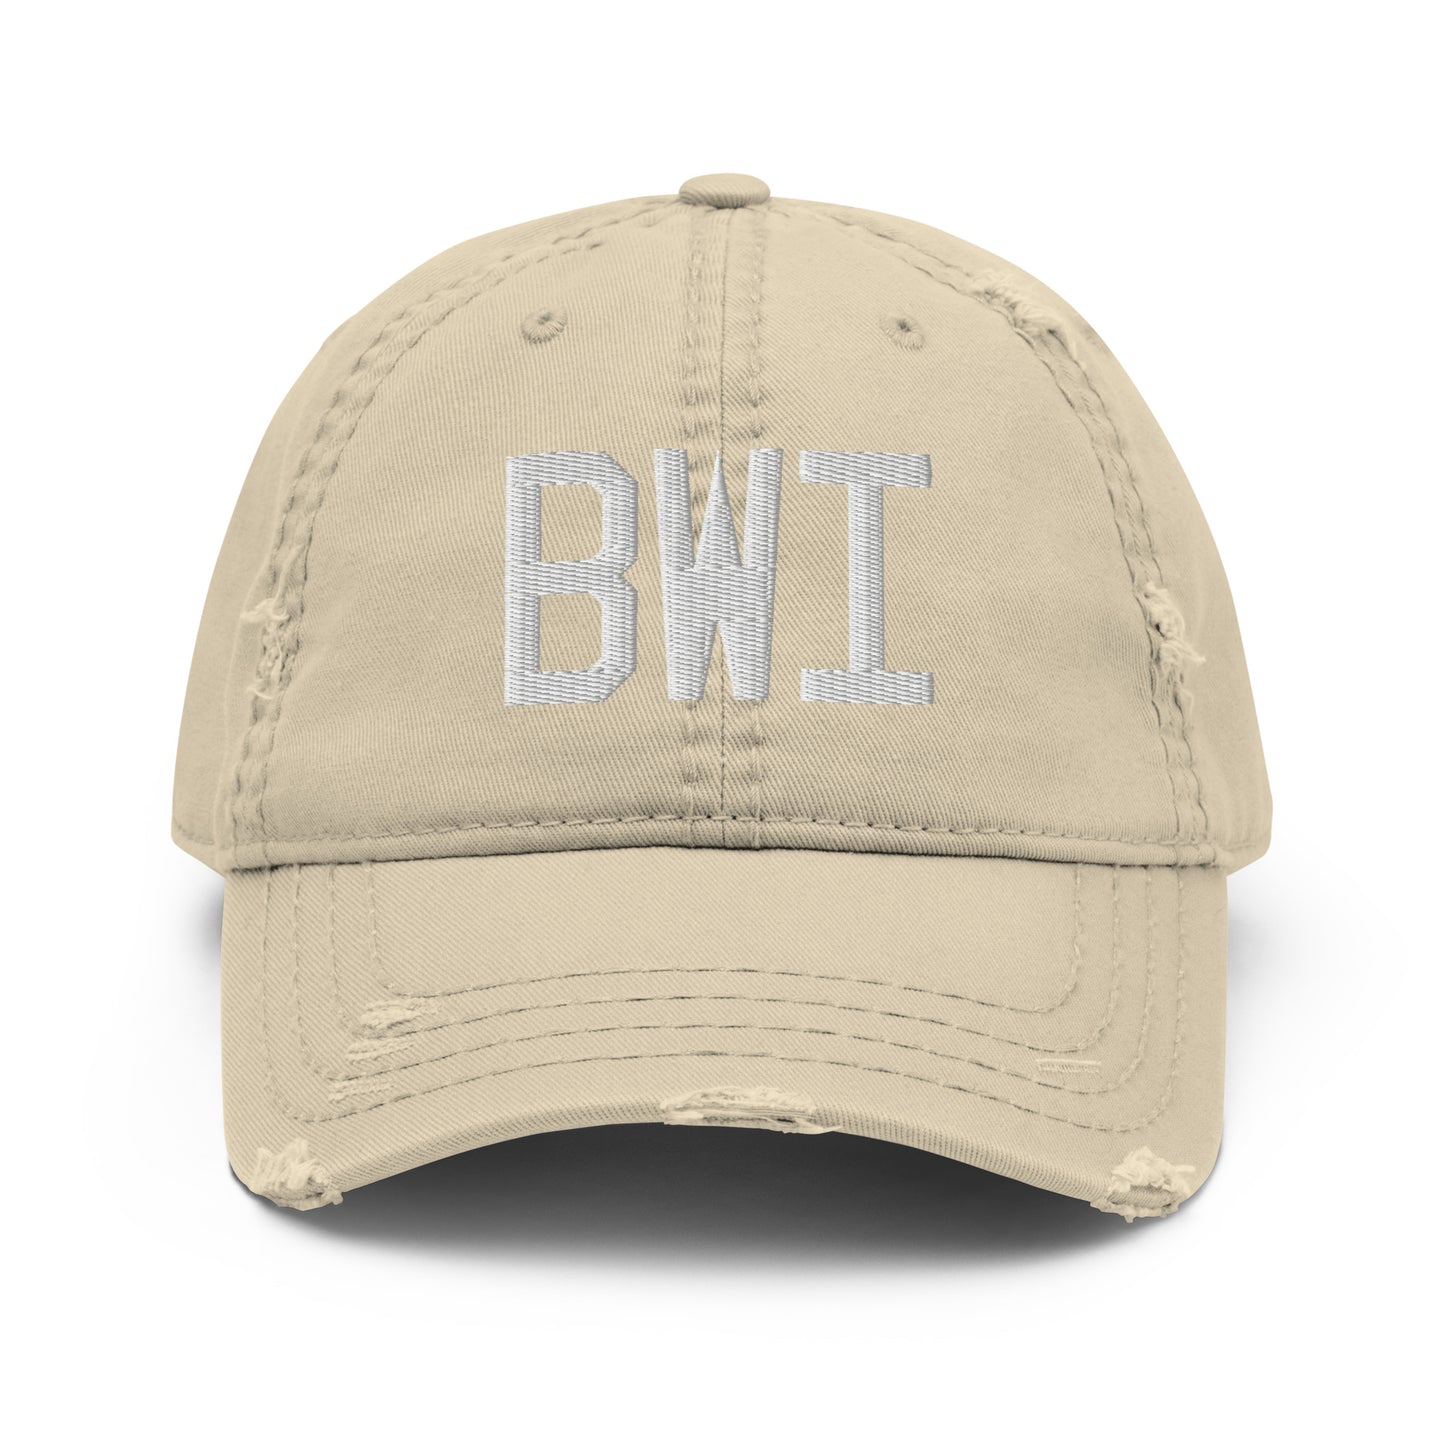 Airport Code Distressed Hat - White • BWI Baltimore • YHM Designs - Image 18